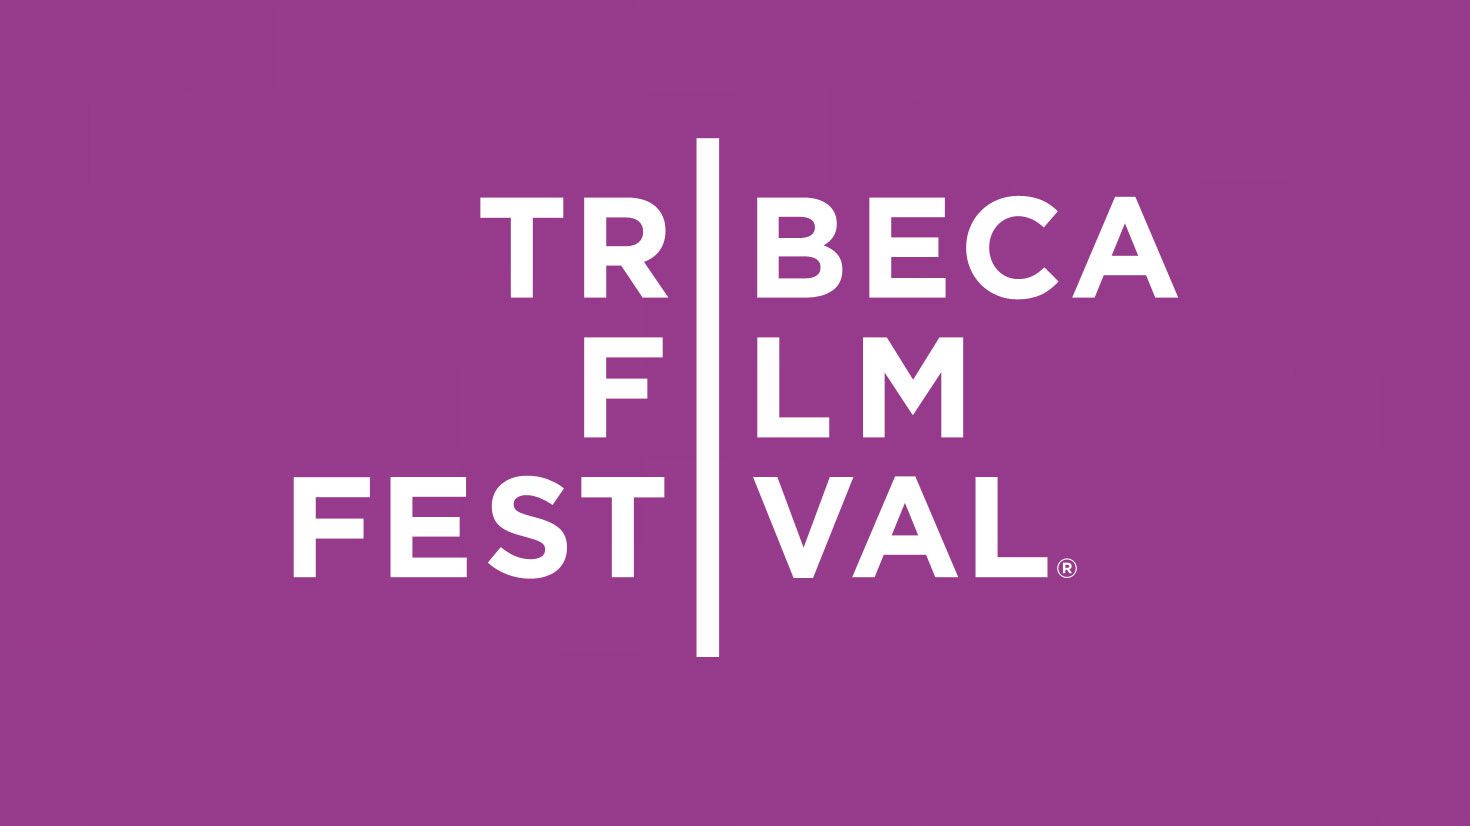 A purple background with the tribeca film festival logo.